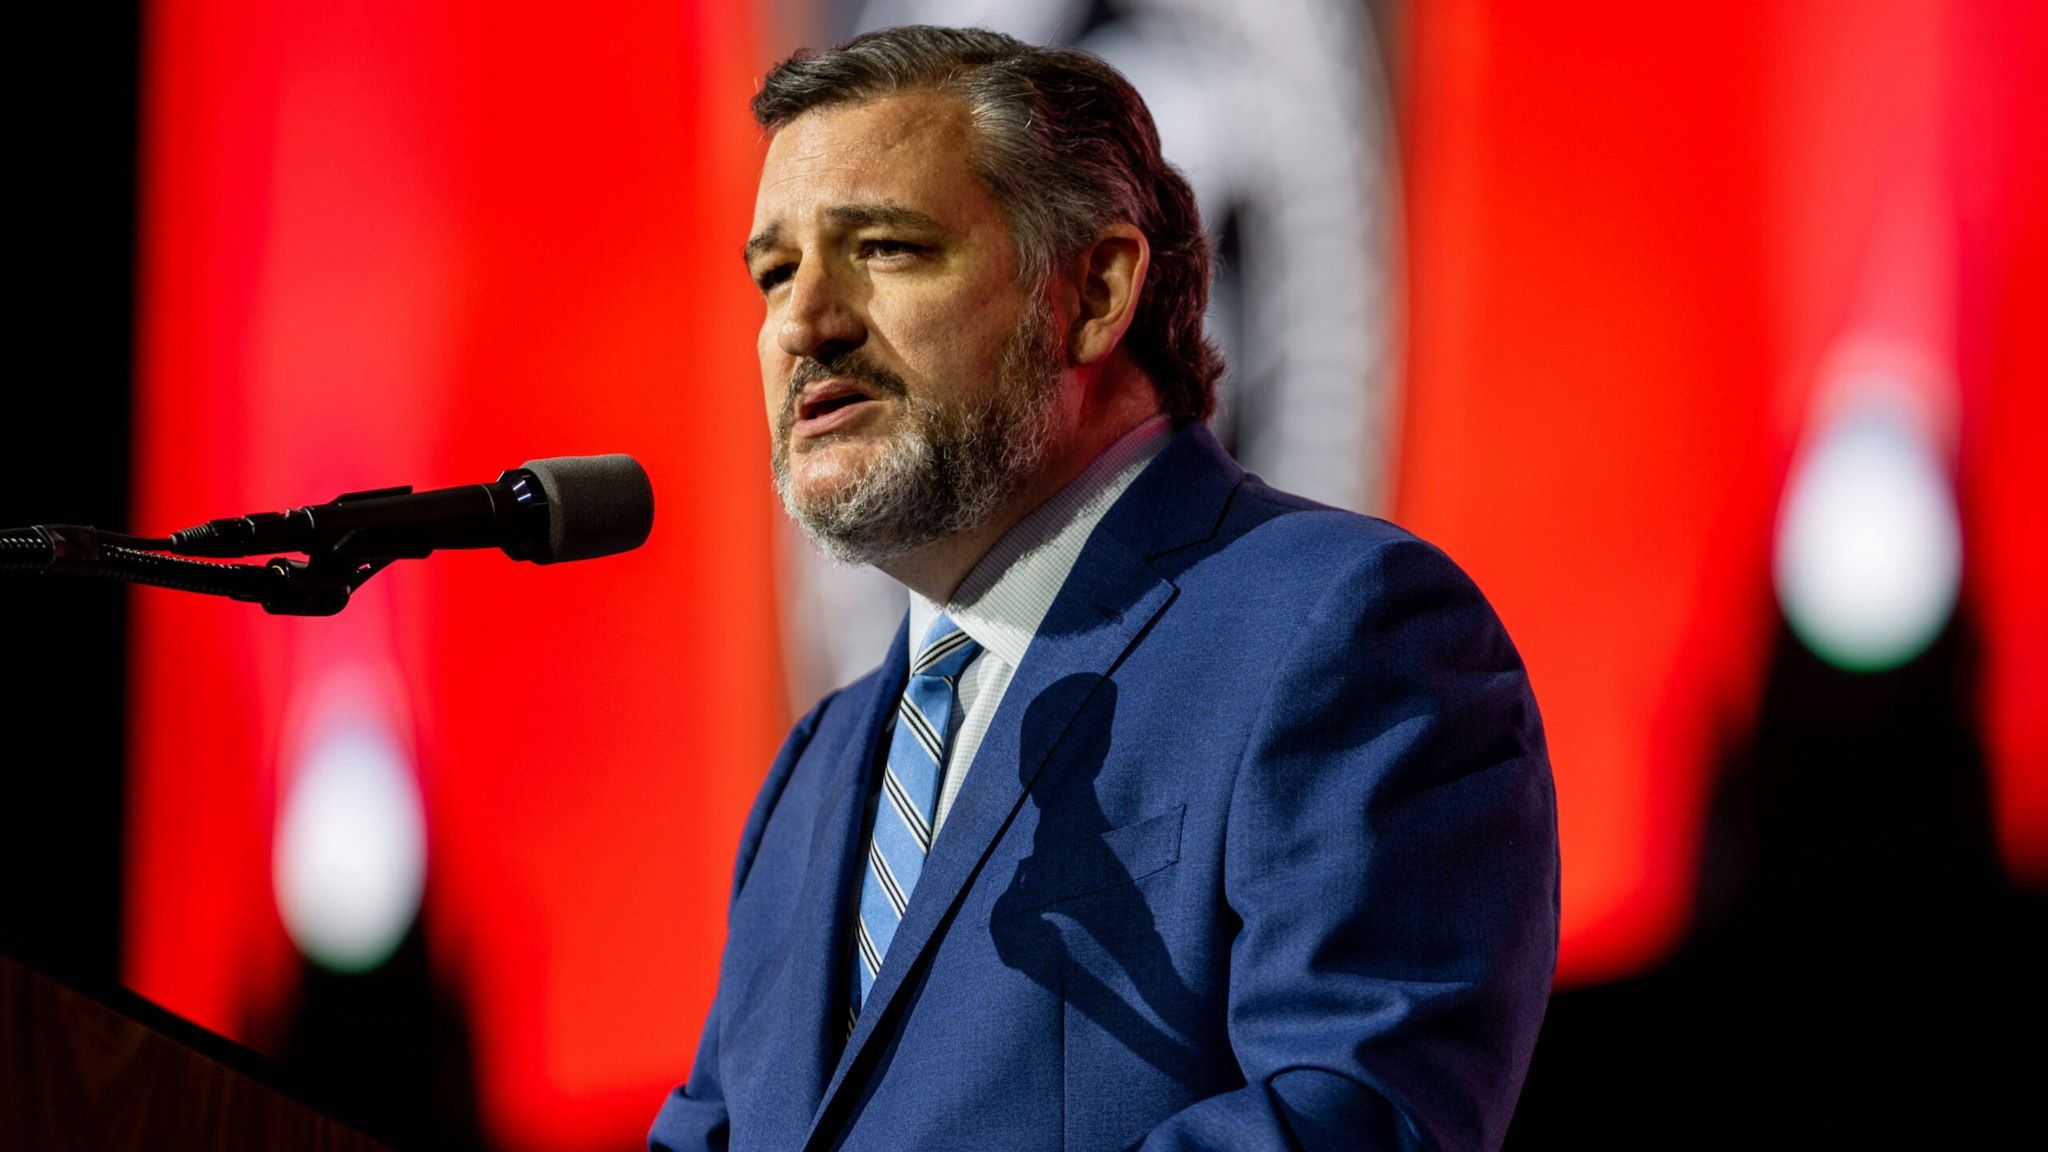 HOUSTON, TEXAS - MAY 27: U.S. Sen. Ted Cruz (R-TX) speaks during the National Rifle Association (NRA) annual convention at the George R. Brown Convention Center on May 27, 2022 in Houston, Texas. The annual National Rifle Association comes days after the mass shooting in Uvalde, Texas which left 19 students and 2 adults dead, with the gunman fatally shot by law enforcement officers.